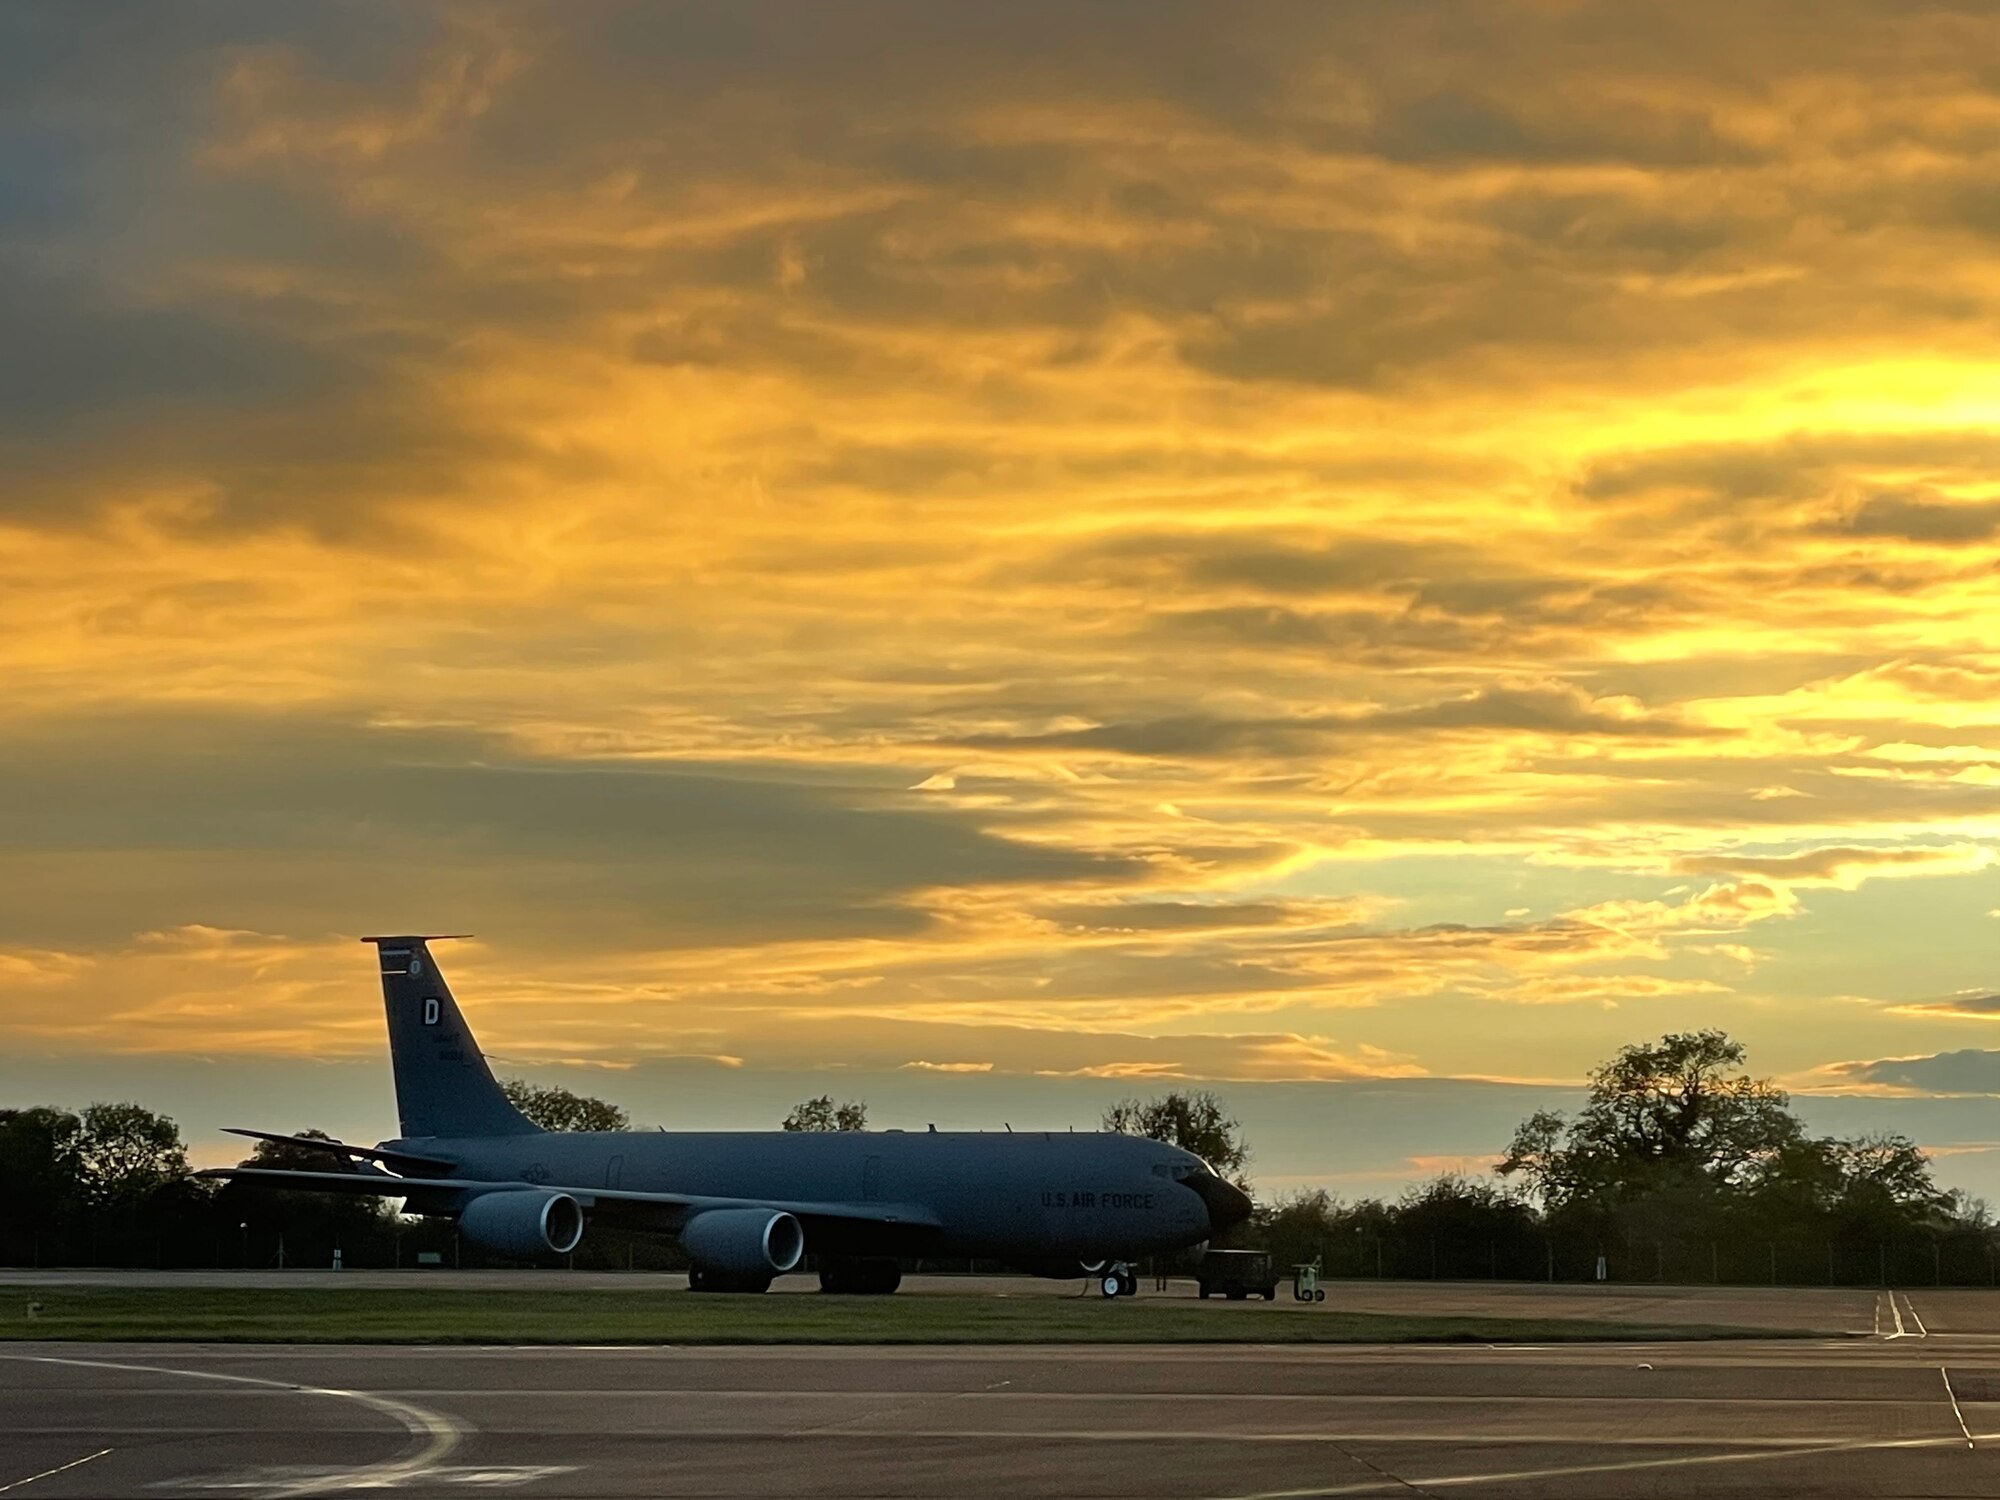 A U.S. Air Force KC-135 Stratotanker aircraft assigned to the 100th Air Refueling Wing, Royal Air Force Mildenhall, England, sits on the flightline during exercise Castle Forge at RAF Fairford, England, Nov. 3, 2021. Exercising elements of Agile Combat Employment enables U.S. forces in Europe to operate from locations with varying levels of capacity and support, ensuring Airmen and aircrews are postured to deliver lethal combat power across the spectrum of military operations. In addition to F-15 Eagle aircraft operations in the Black Sea Region, Castle Forge encompasses the USAFE-wide ACE capstone event. Castle Forge’s components will better enable forces to quickly disperse and continue to deliver air power from locations with varying levels of capacity and support, ensuring Airmen are always ready to respond to potential threats. (U.S. Air Force photo by Senior Airman Joseph Barron)